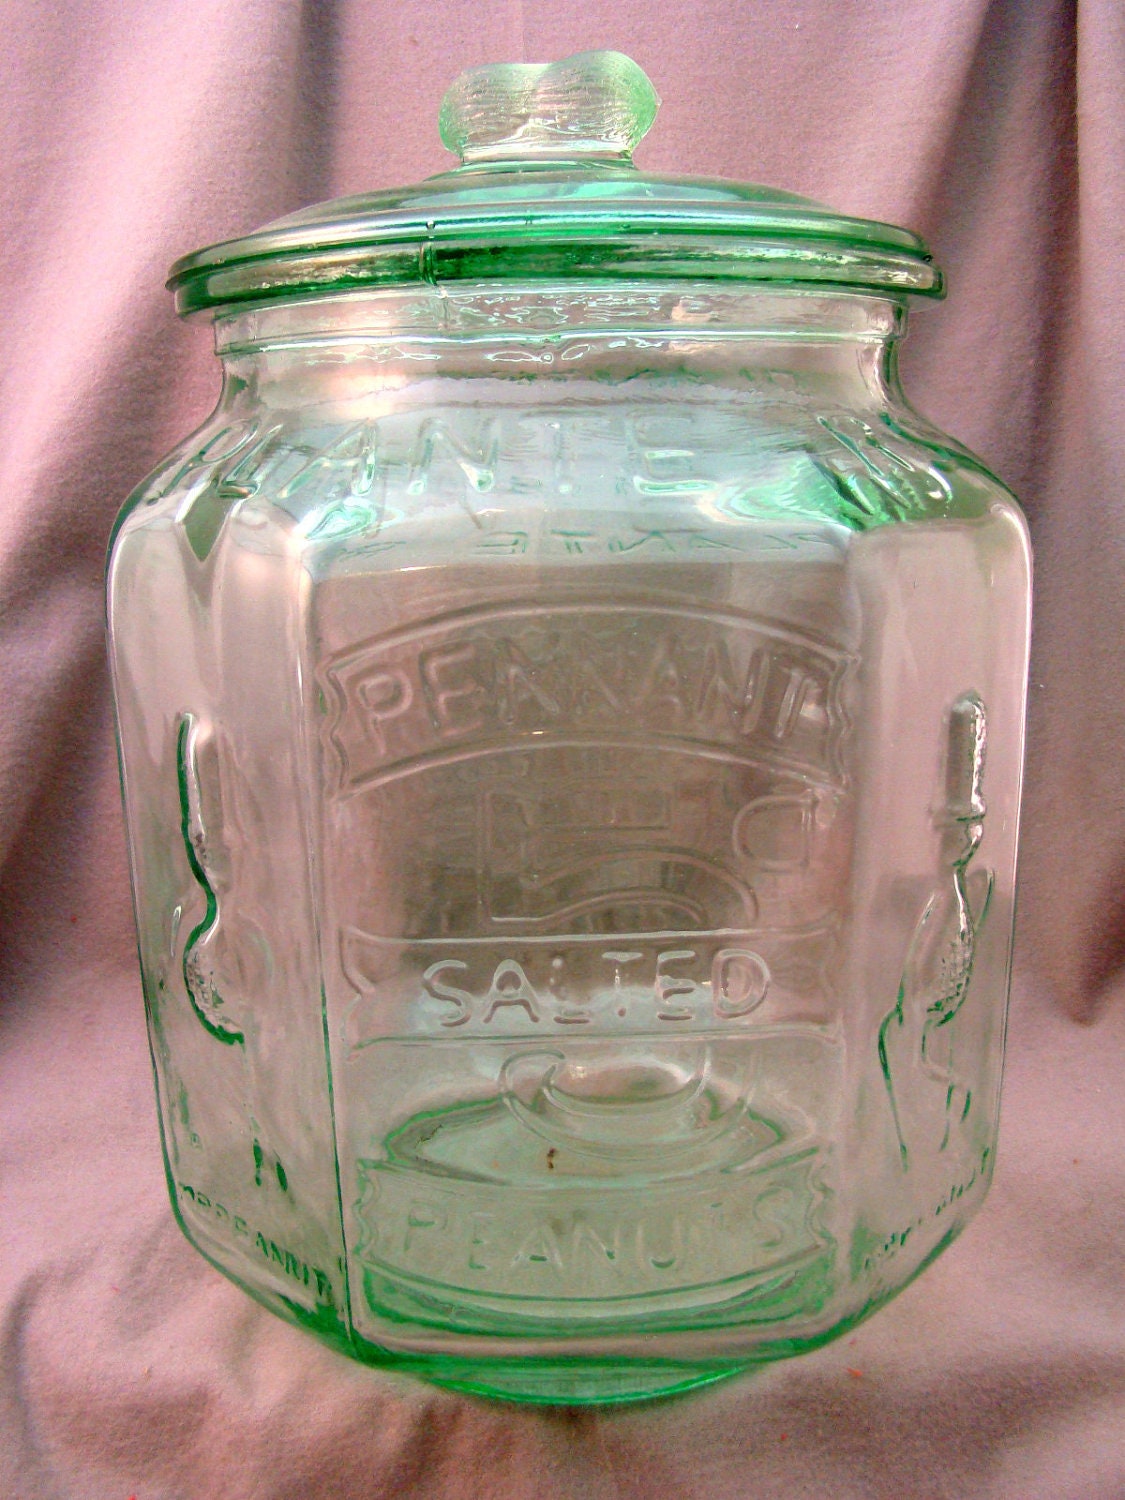 Vintage Green Glass PLANTERS PEANUTS JAR Large Store Counter1125 x 1500